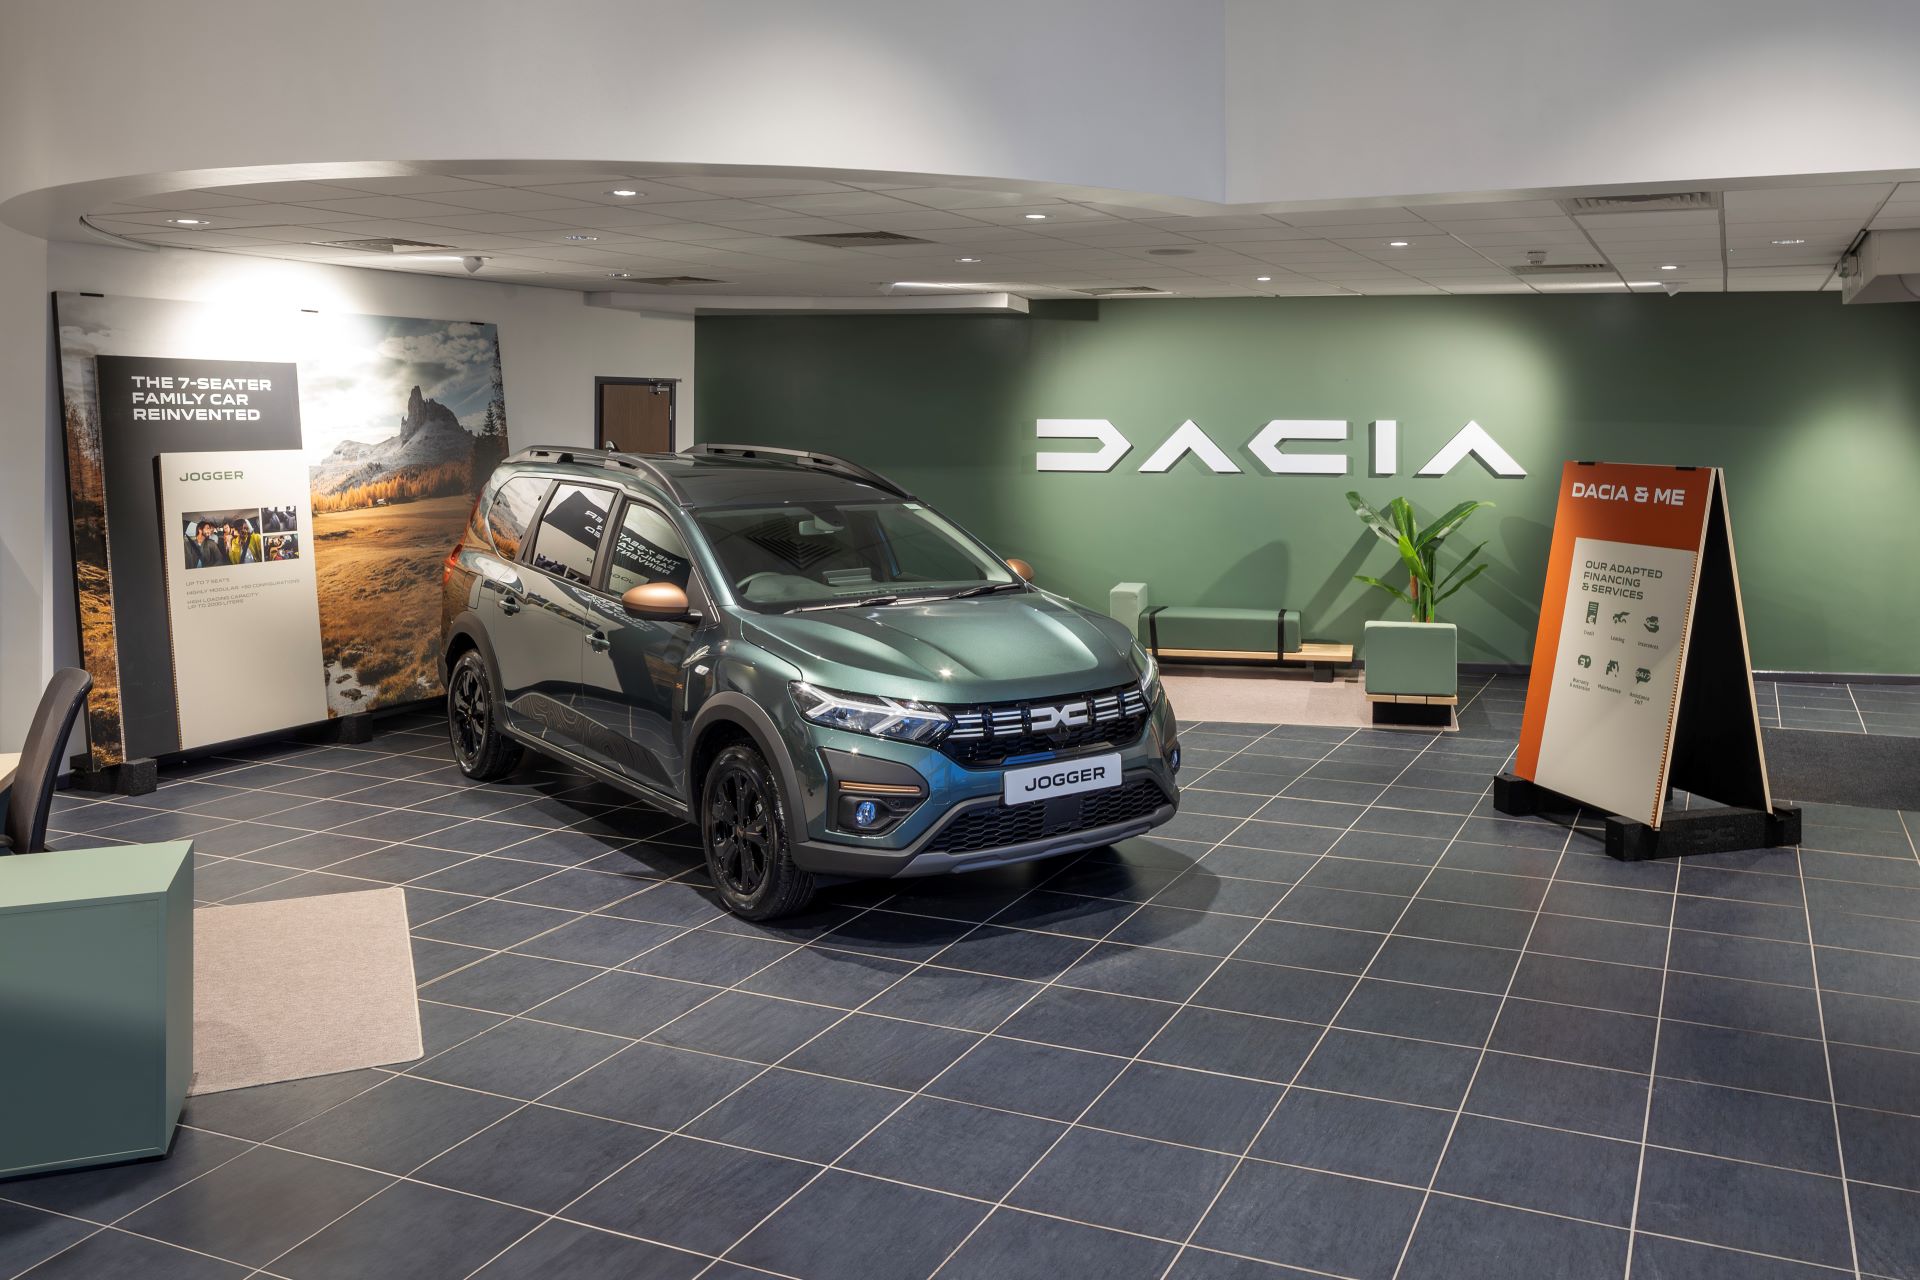 Inside story: recycled tyres, sofas made with plastic bottles – Dacia’s new look interiors are eco-smart